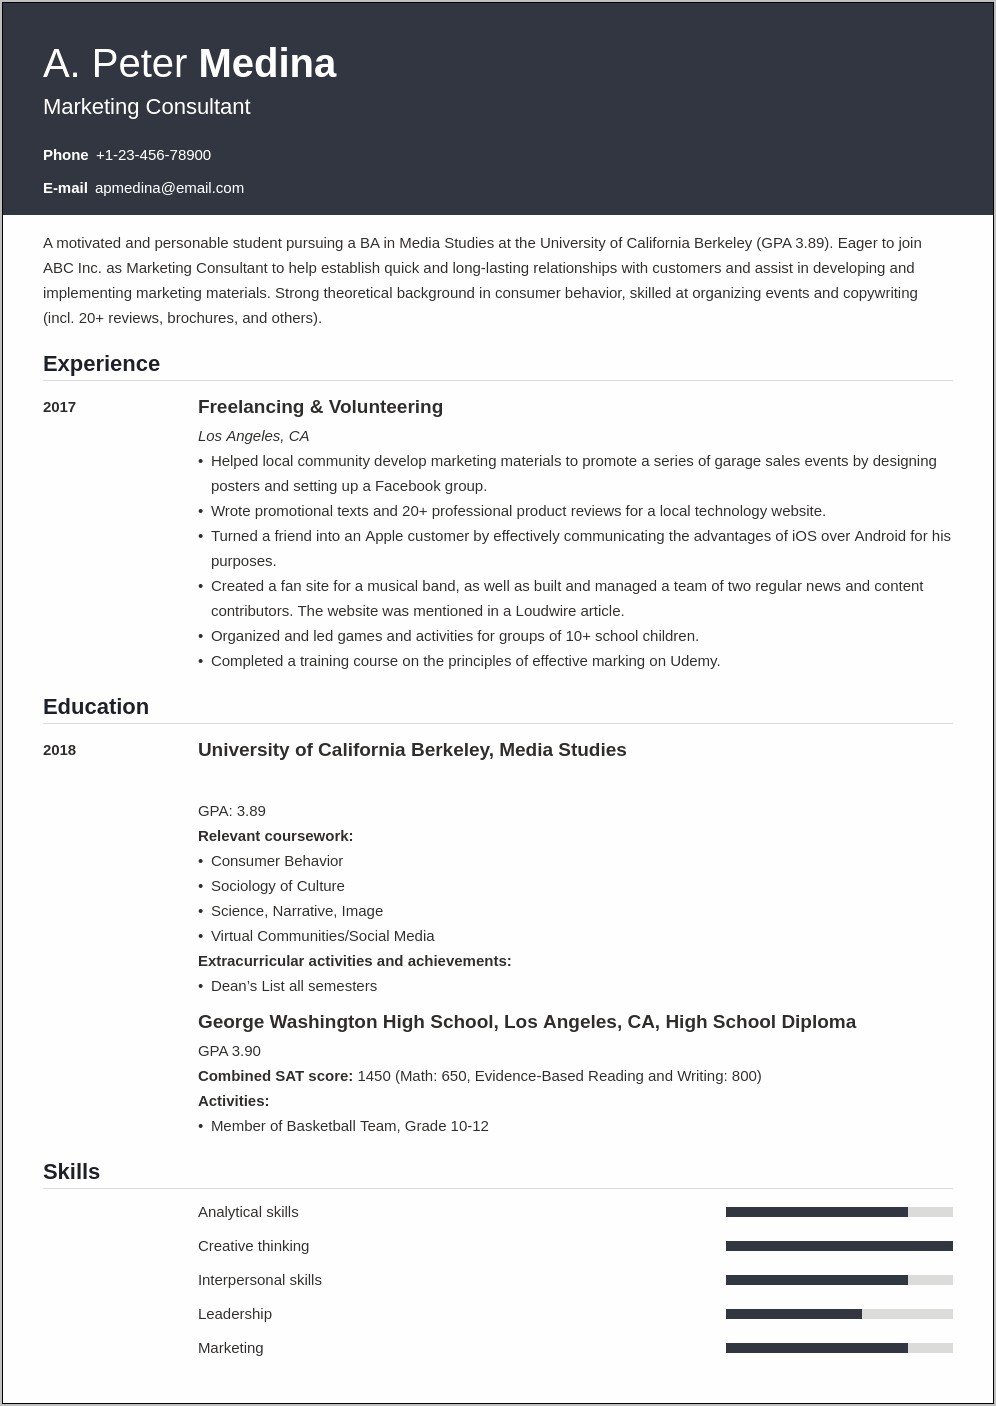 Resume Sample With No Experience Qualifications